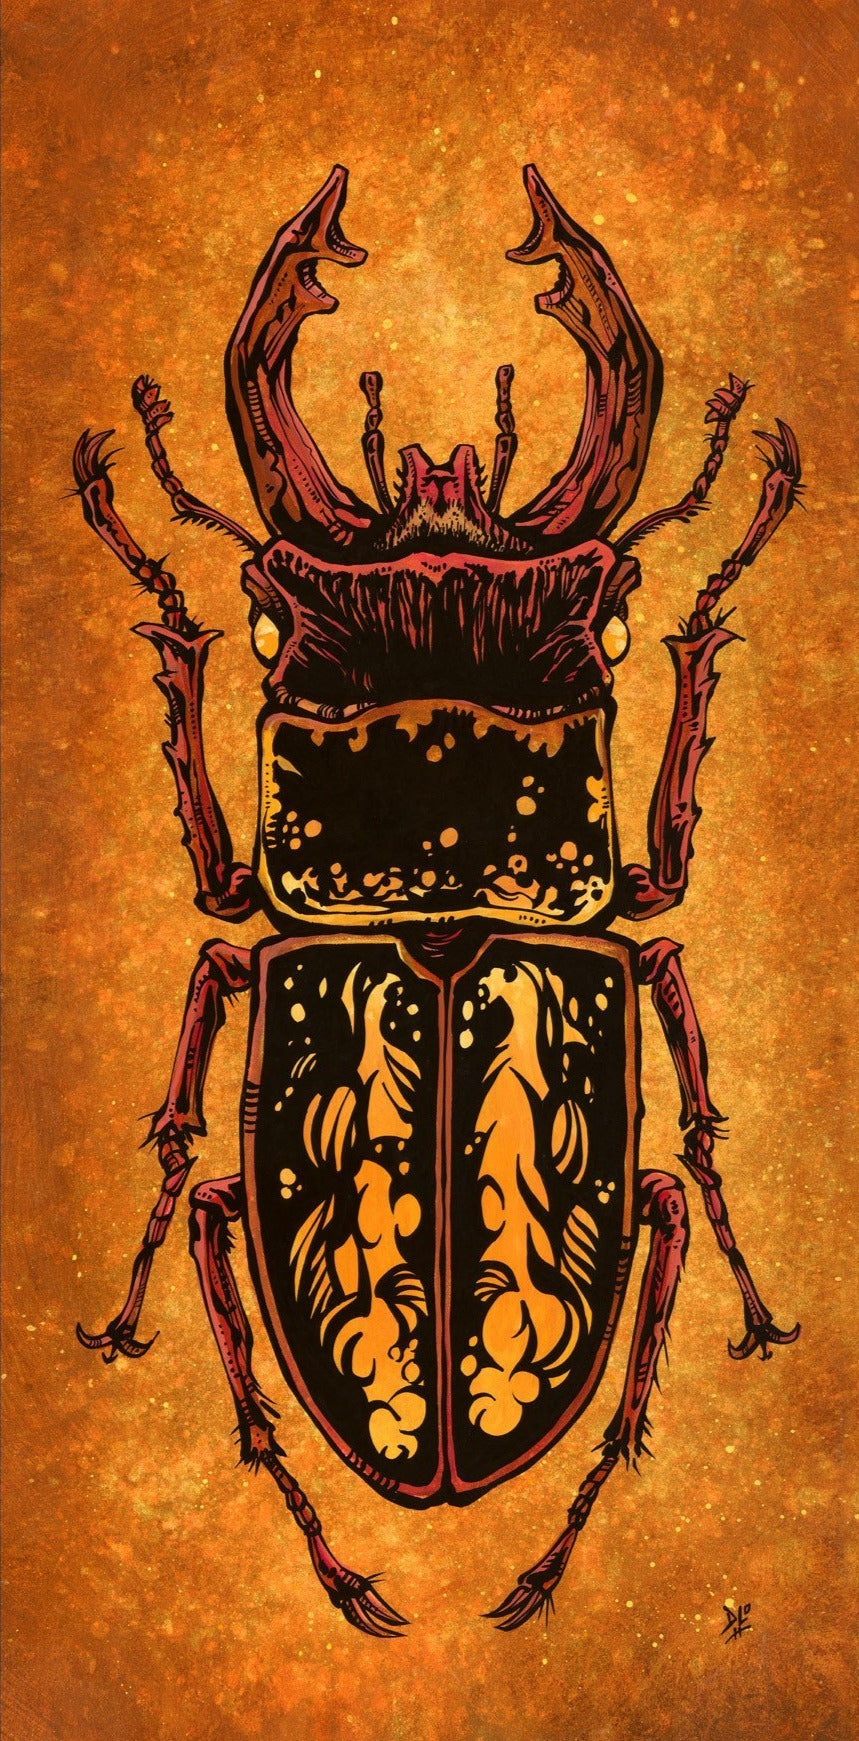 The Stag Beetle by Day of the Dead Artist David Lozeau, Day of the Dead Art, Dia de los Muertos Art, Dia de los Muertos Artist